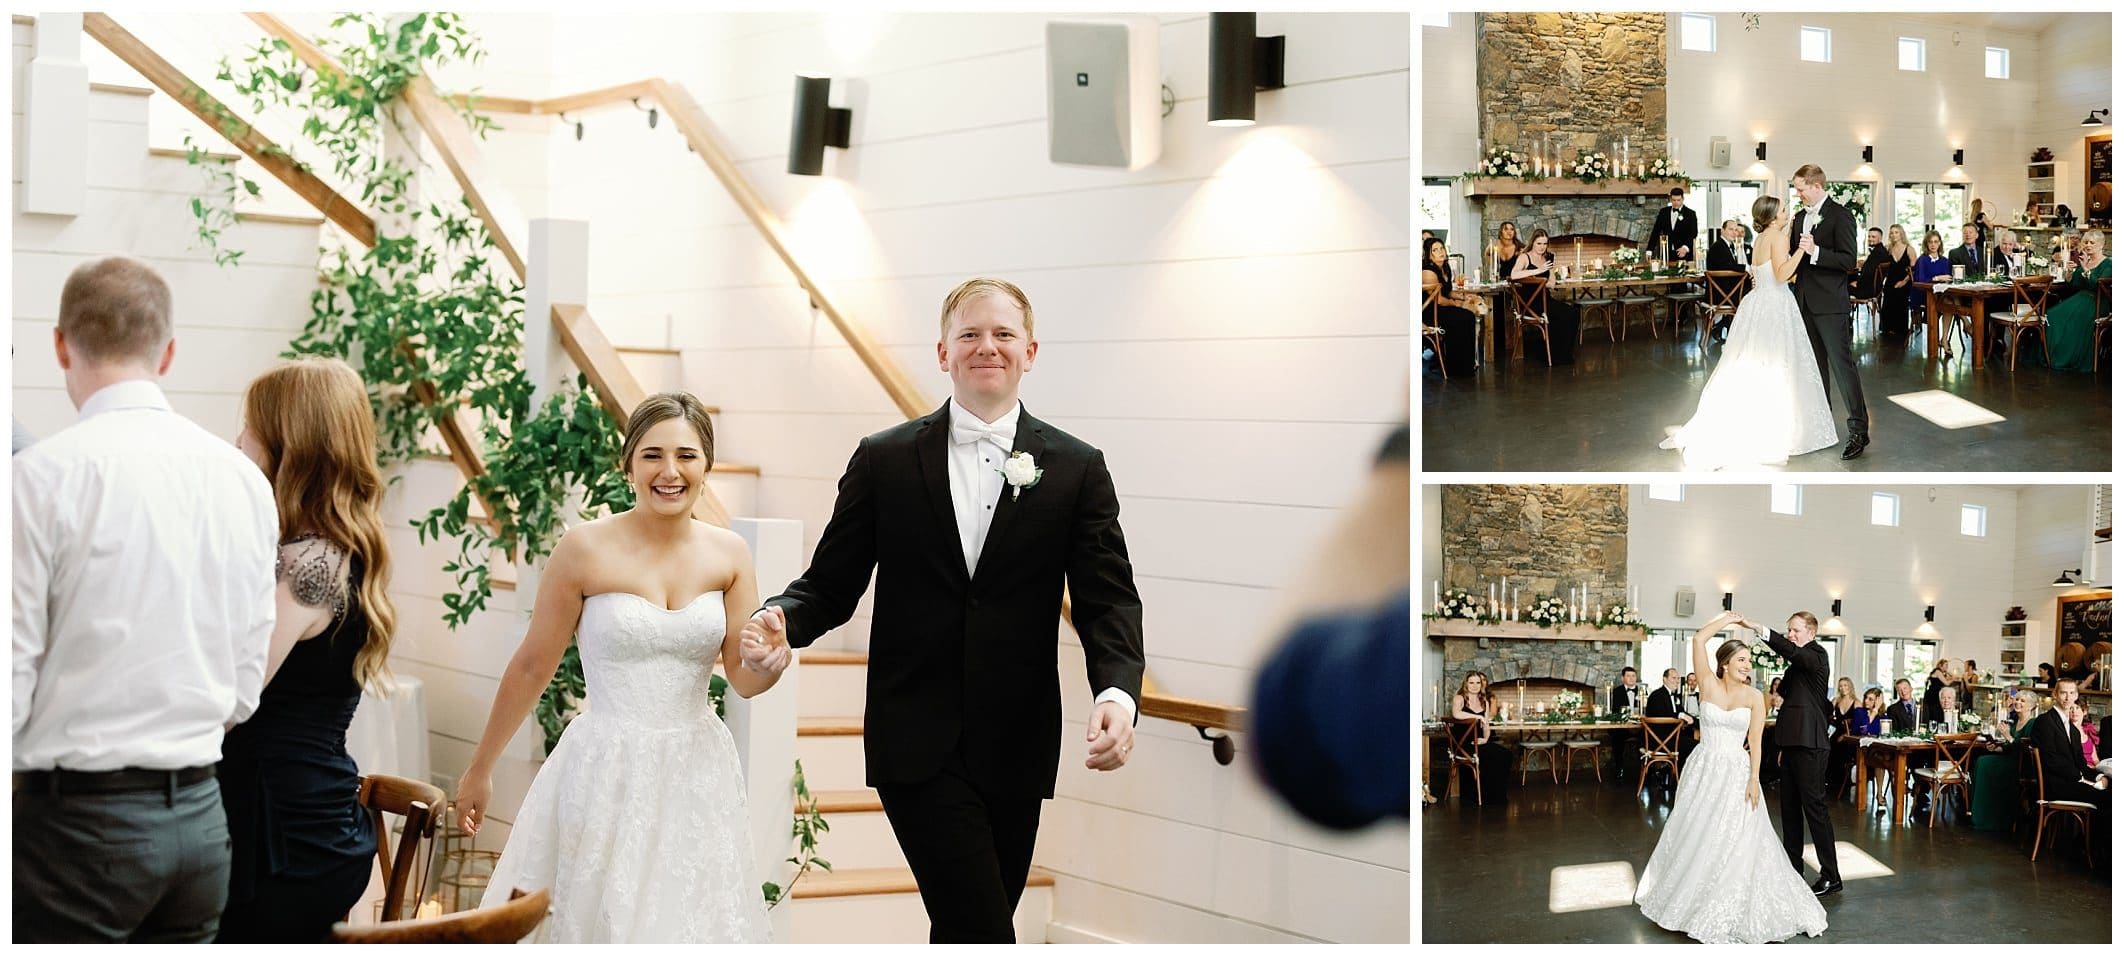 A bride and groom walking down the stairs at their wedding reception.